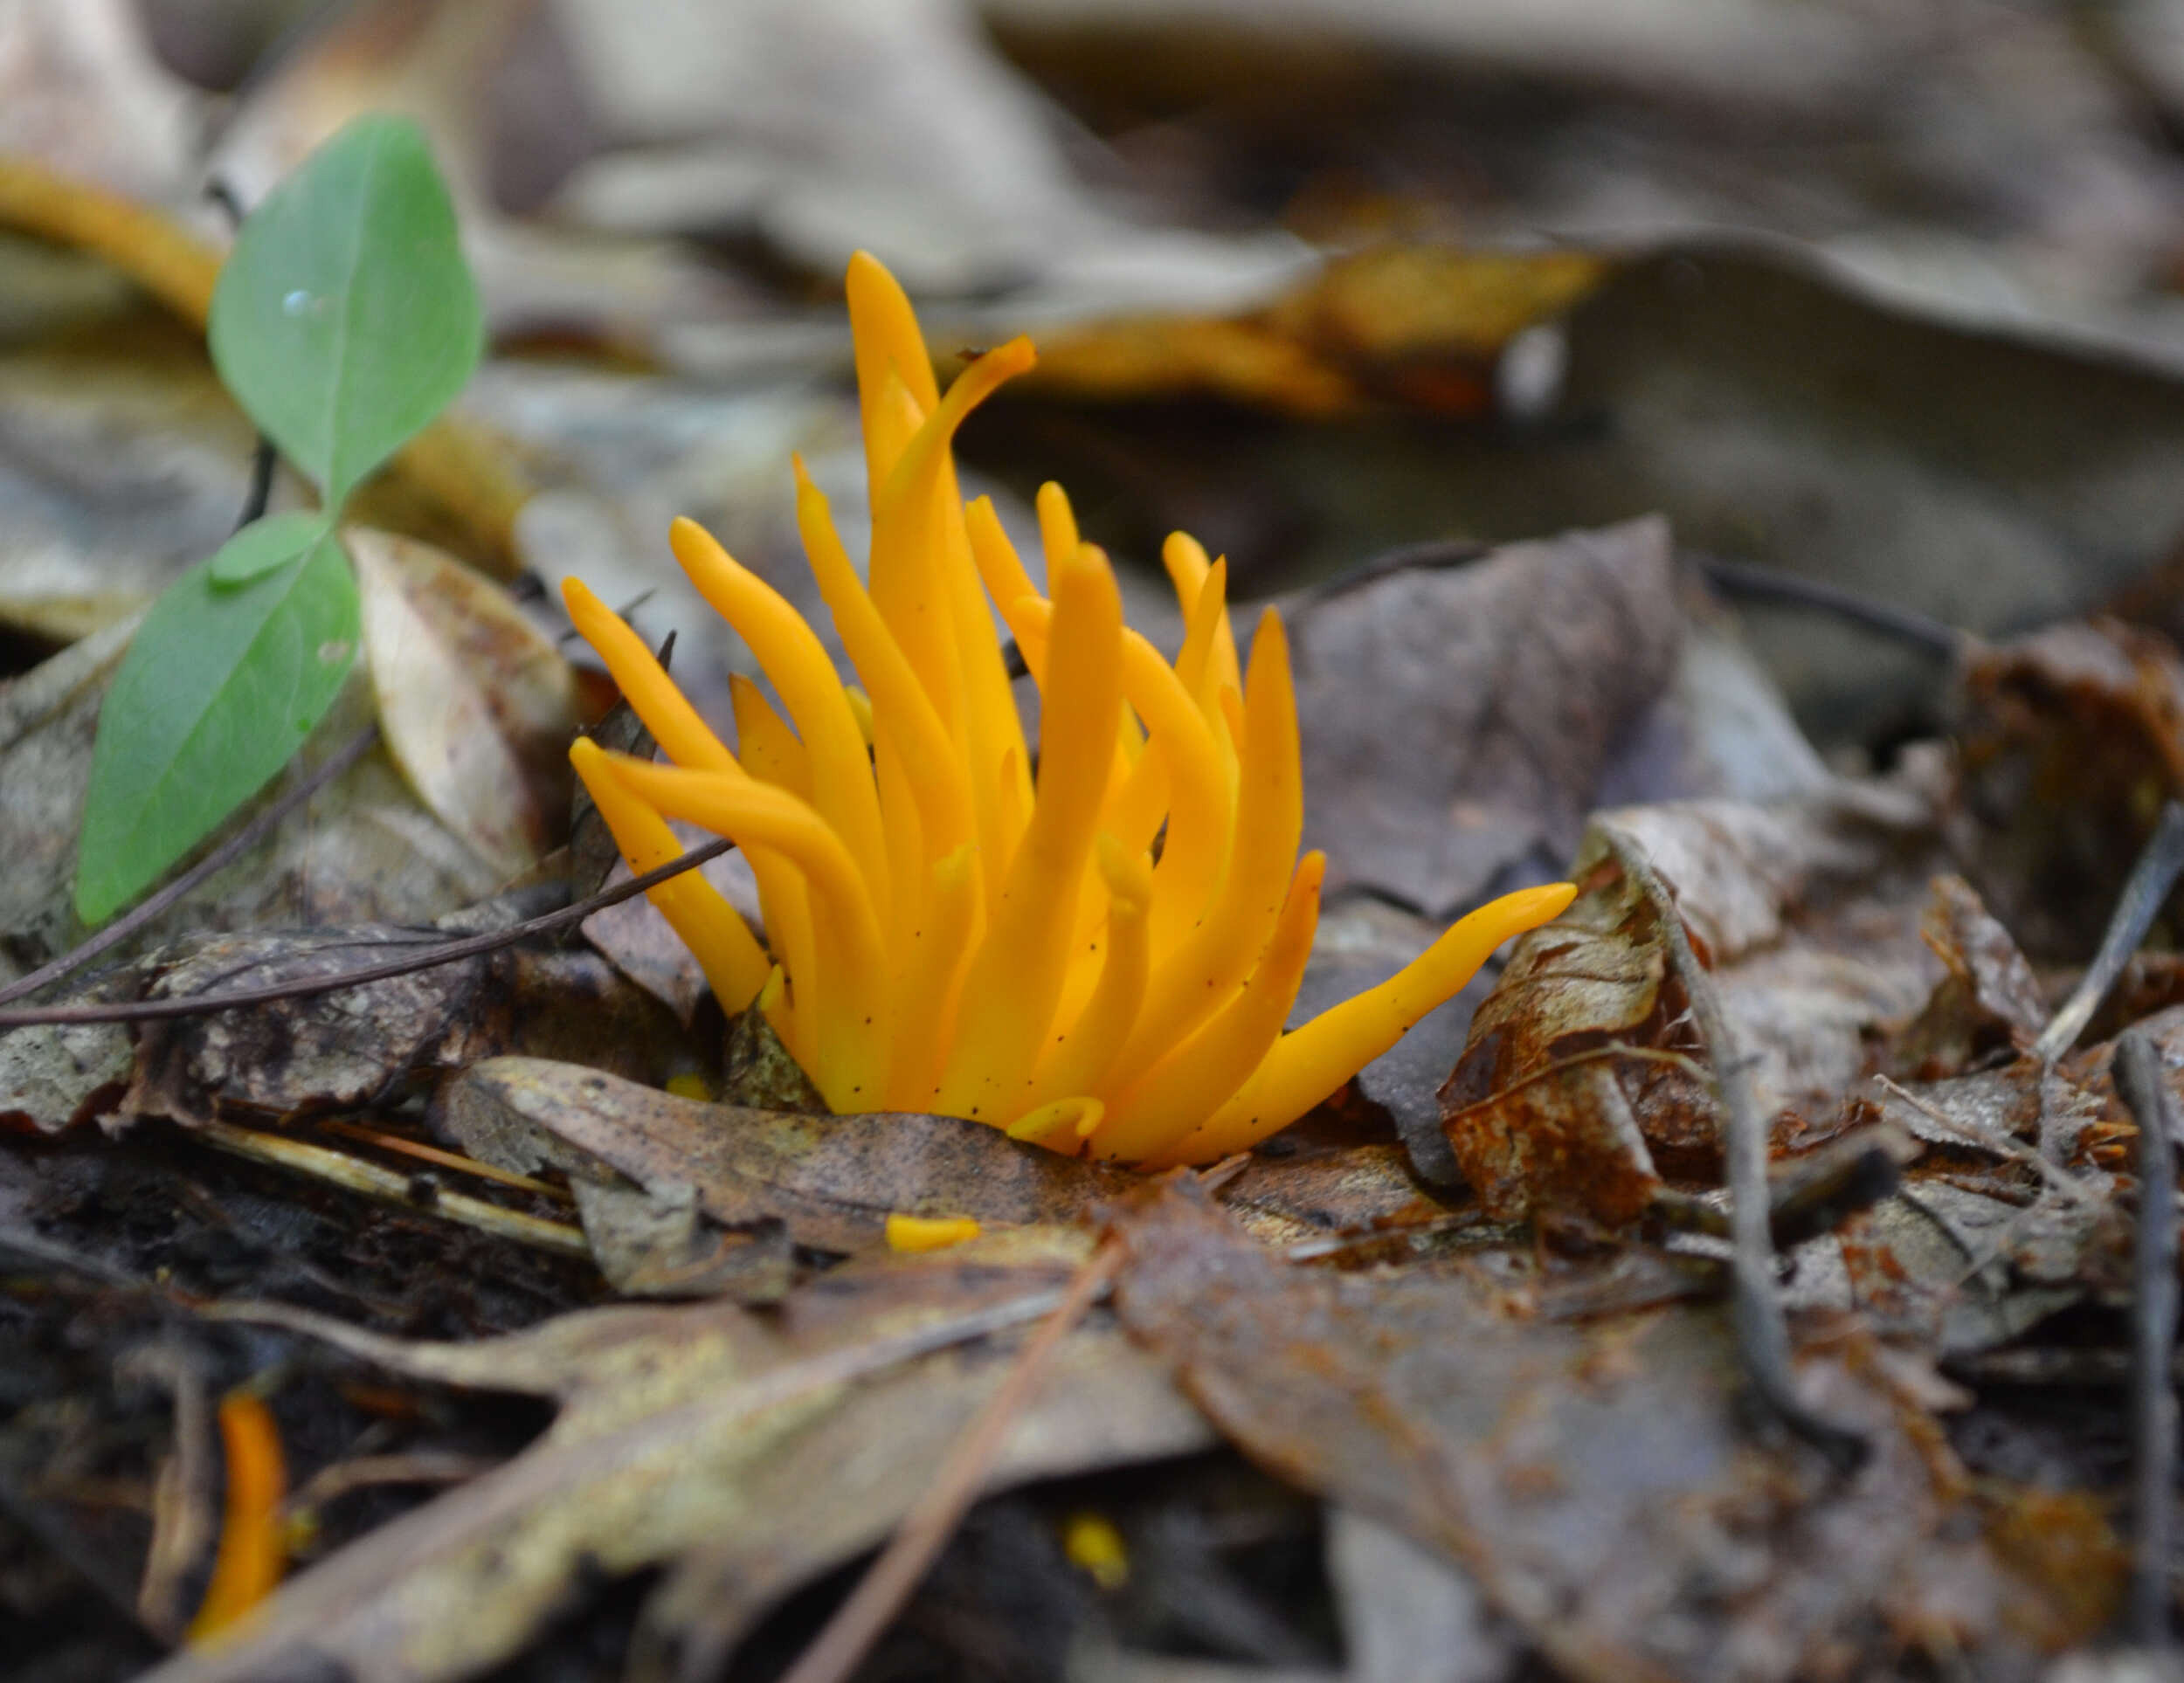 Bright yellow, finger-like mushrooms rise out of brown leaf litter on the forest floor. (photo © Roxanne Copeland)